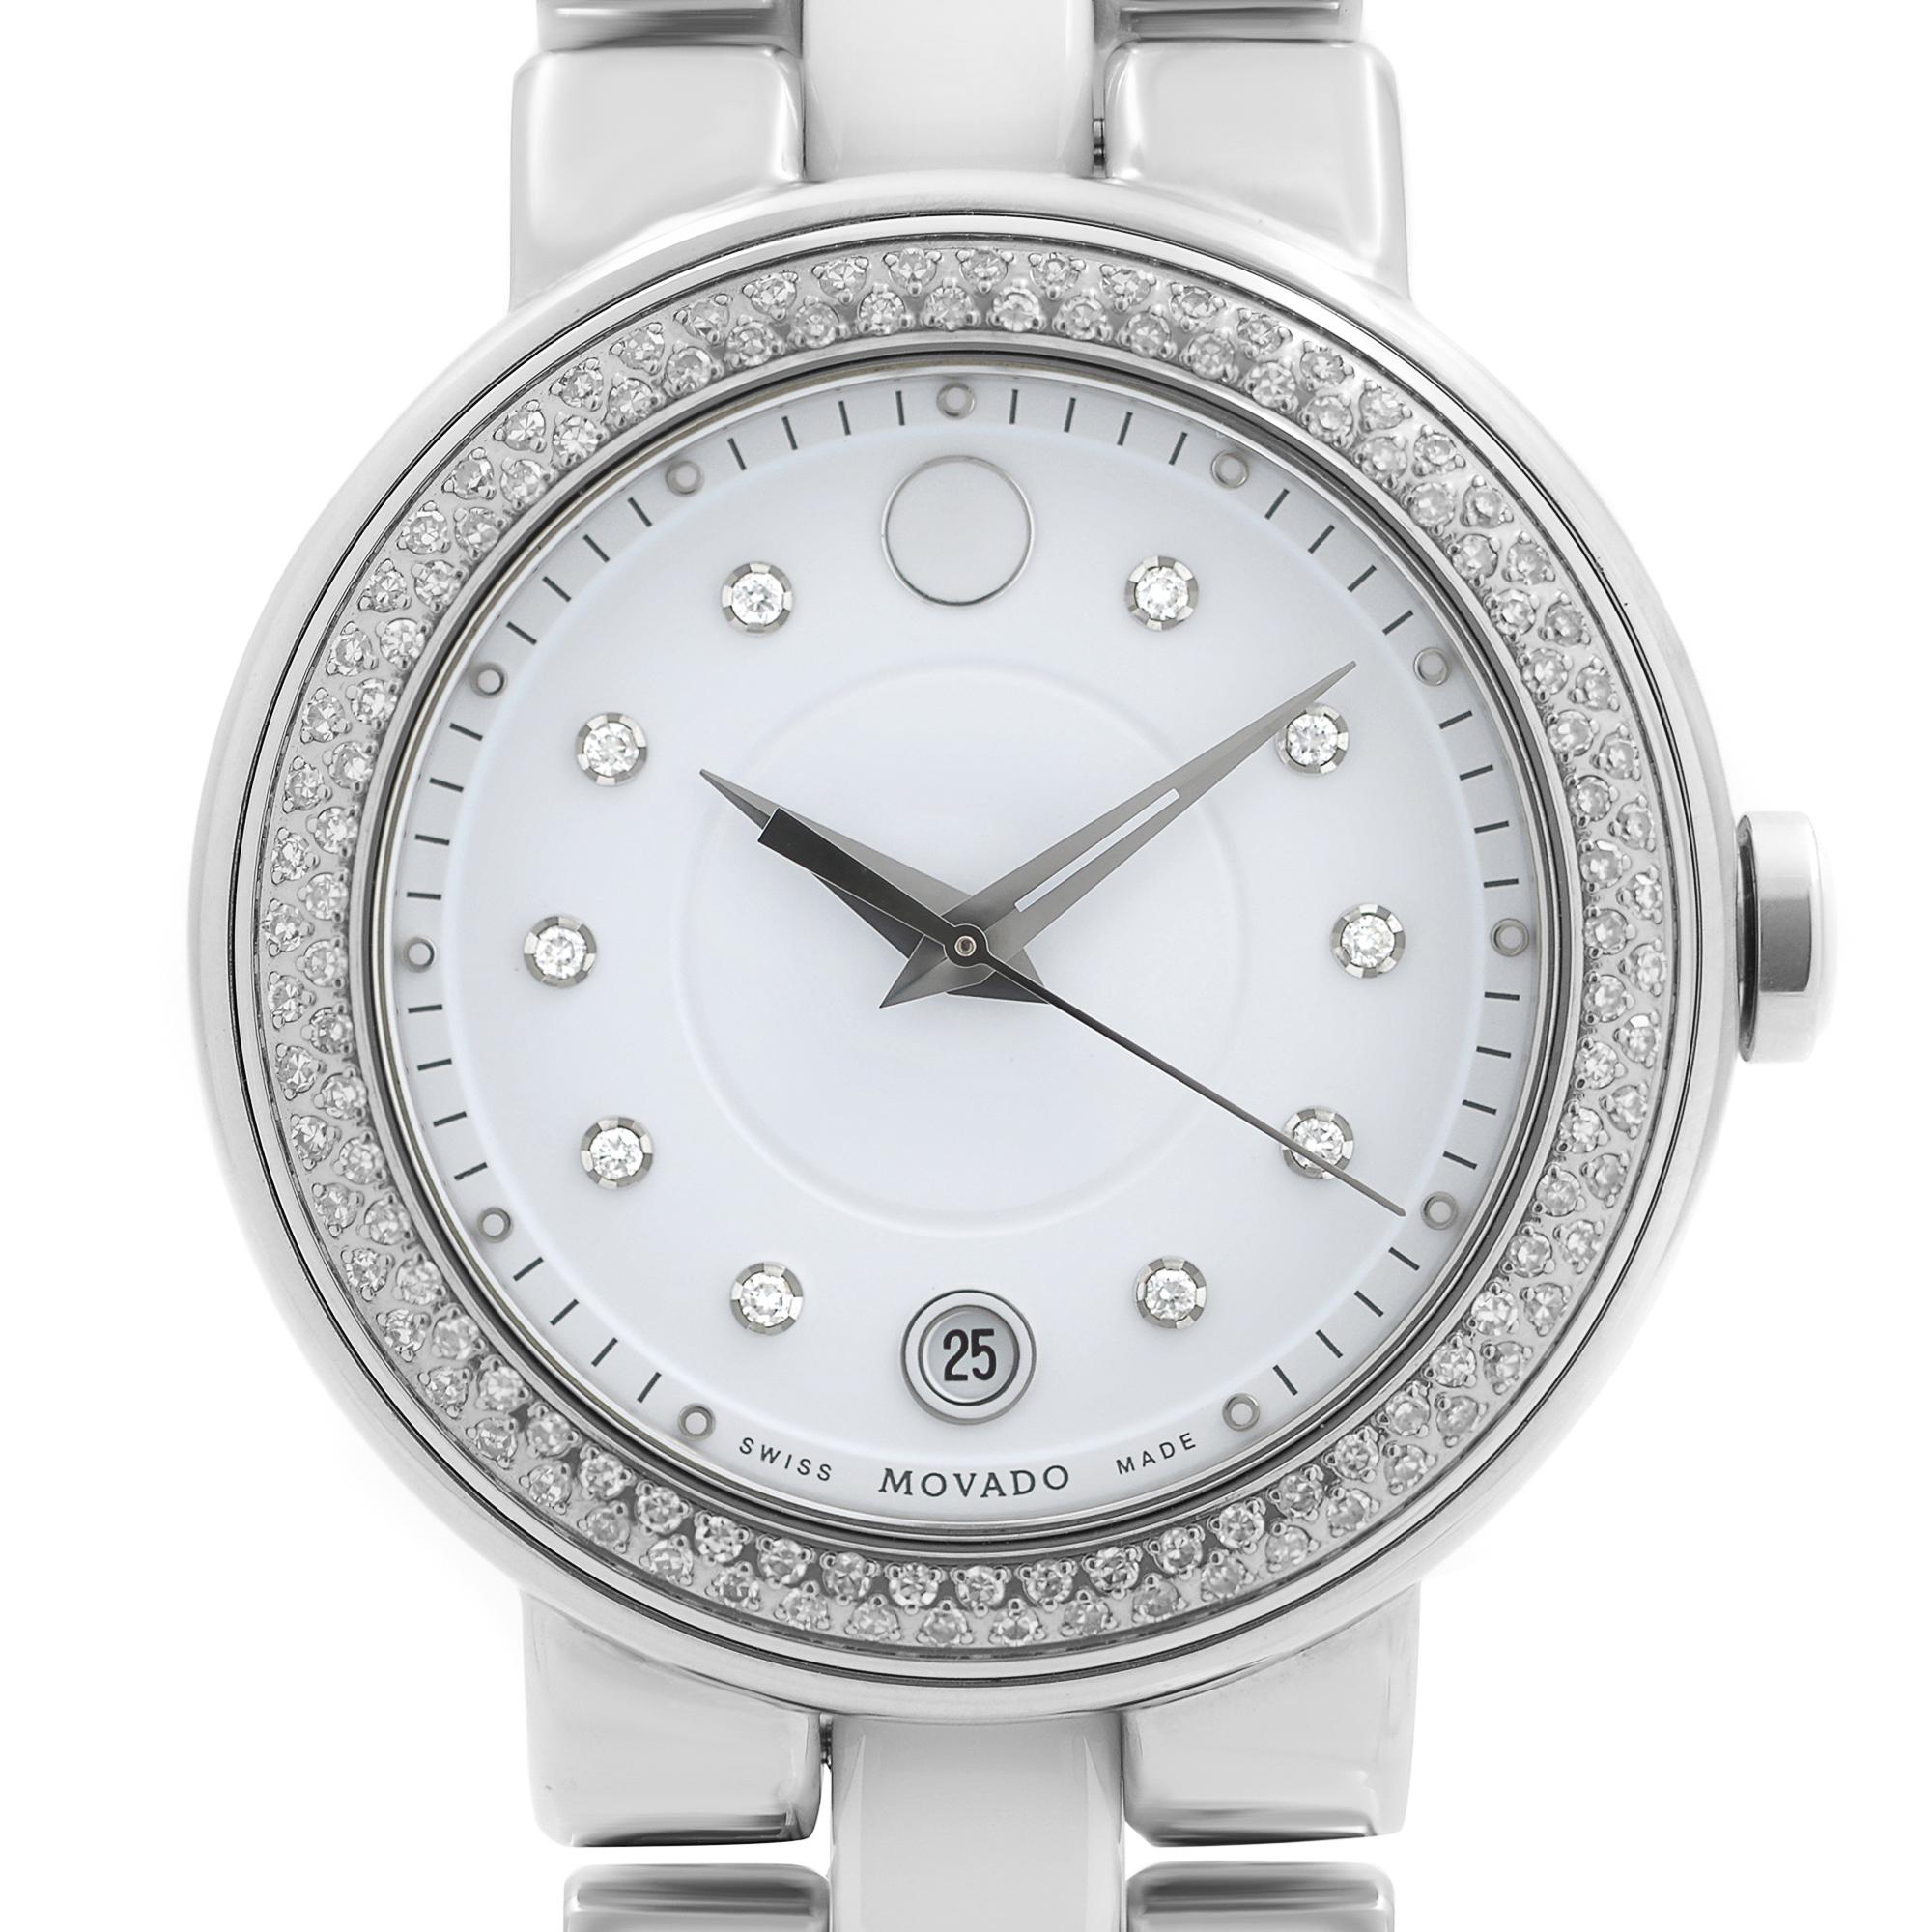 Store Display Model Movado Cerena White Ceramic Steel Diamond Bezel Quartz Ladies Watch 0606625. The Watch Might Have Minor Blemishes Due to Store Handling. Original Box and Papers are Included. Covered by 1-year Chronostore Warranty. 
Details:
MSRP